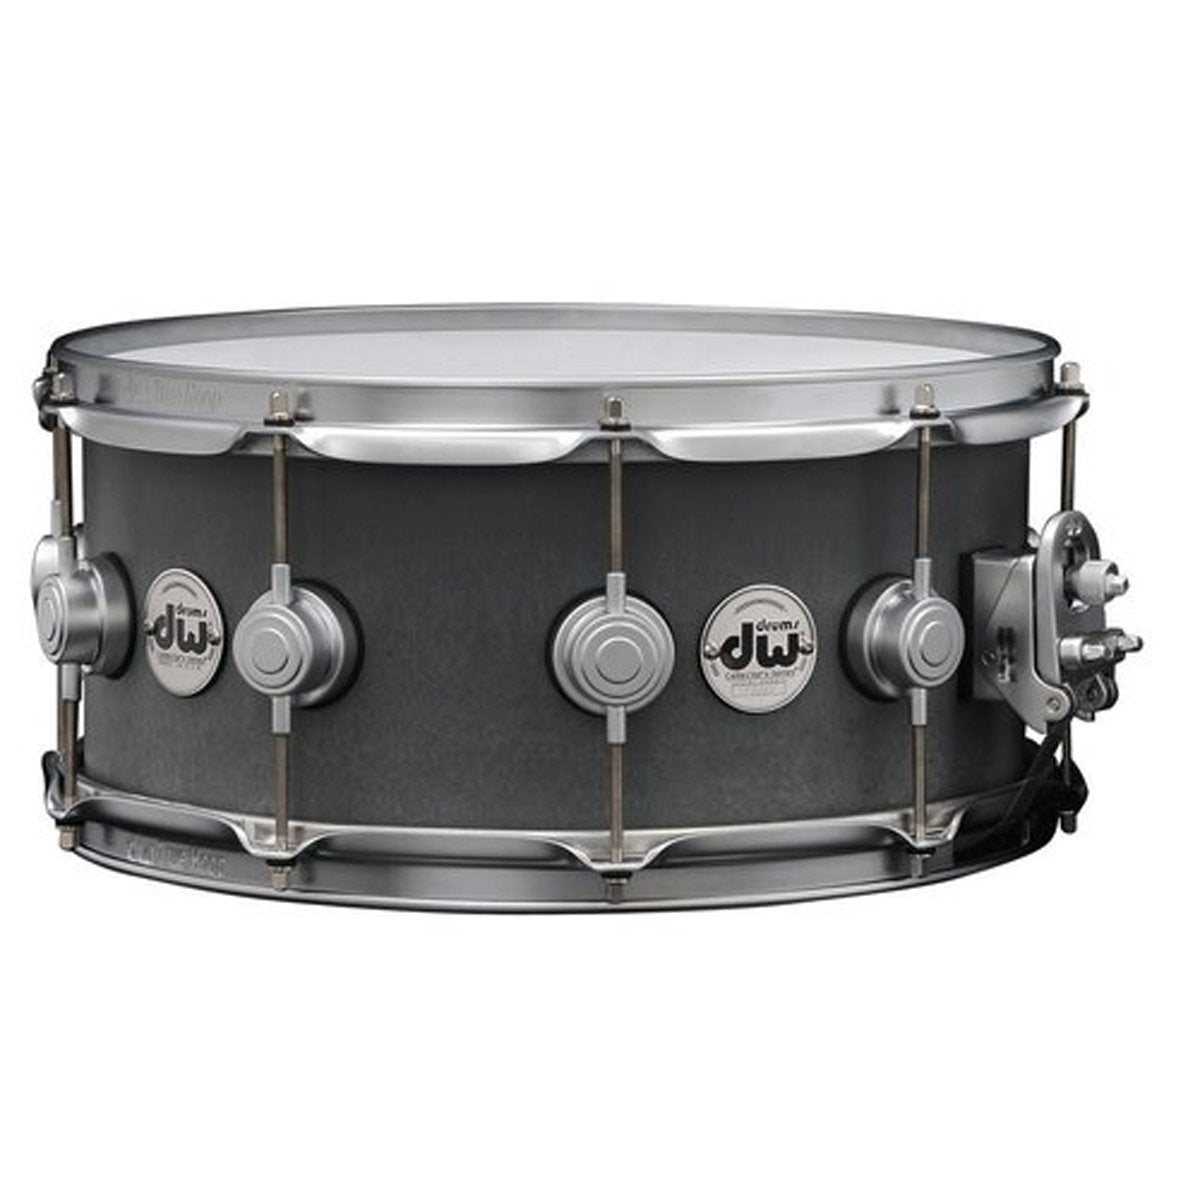 DW Collector's Series 13"x7" Concrete Snare